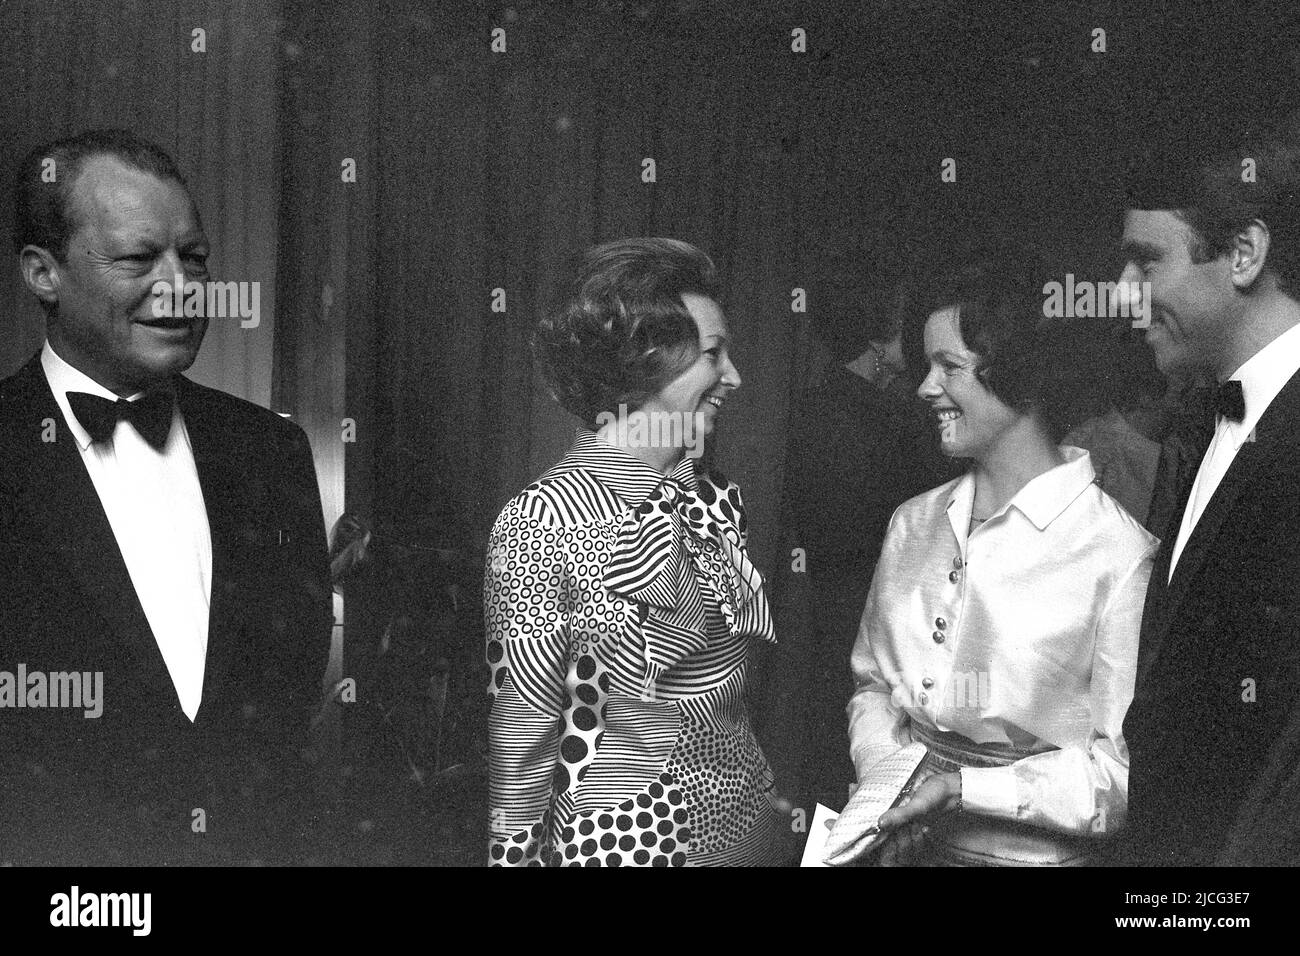 Willy BRANDT, SPD, Federal Chancellor, with his wife Rut, in conversation with Ninja FRAHM, (daughter of Willy Brandt from his first marriage with Carlota THORKILDSEN) and her fiancé, festive wardrobe, sideways, B/W photo, April 25th, 1970. Stock Photo